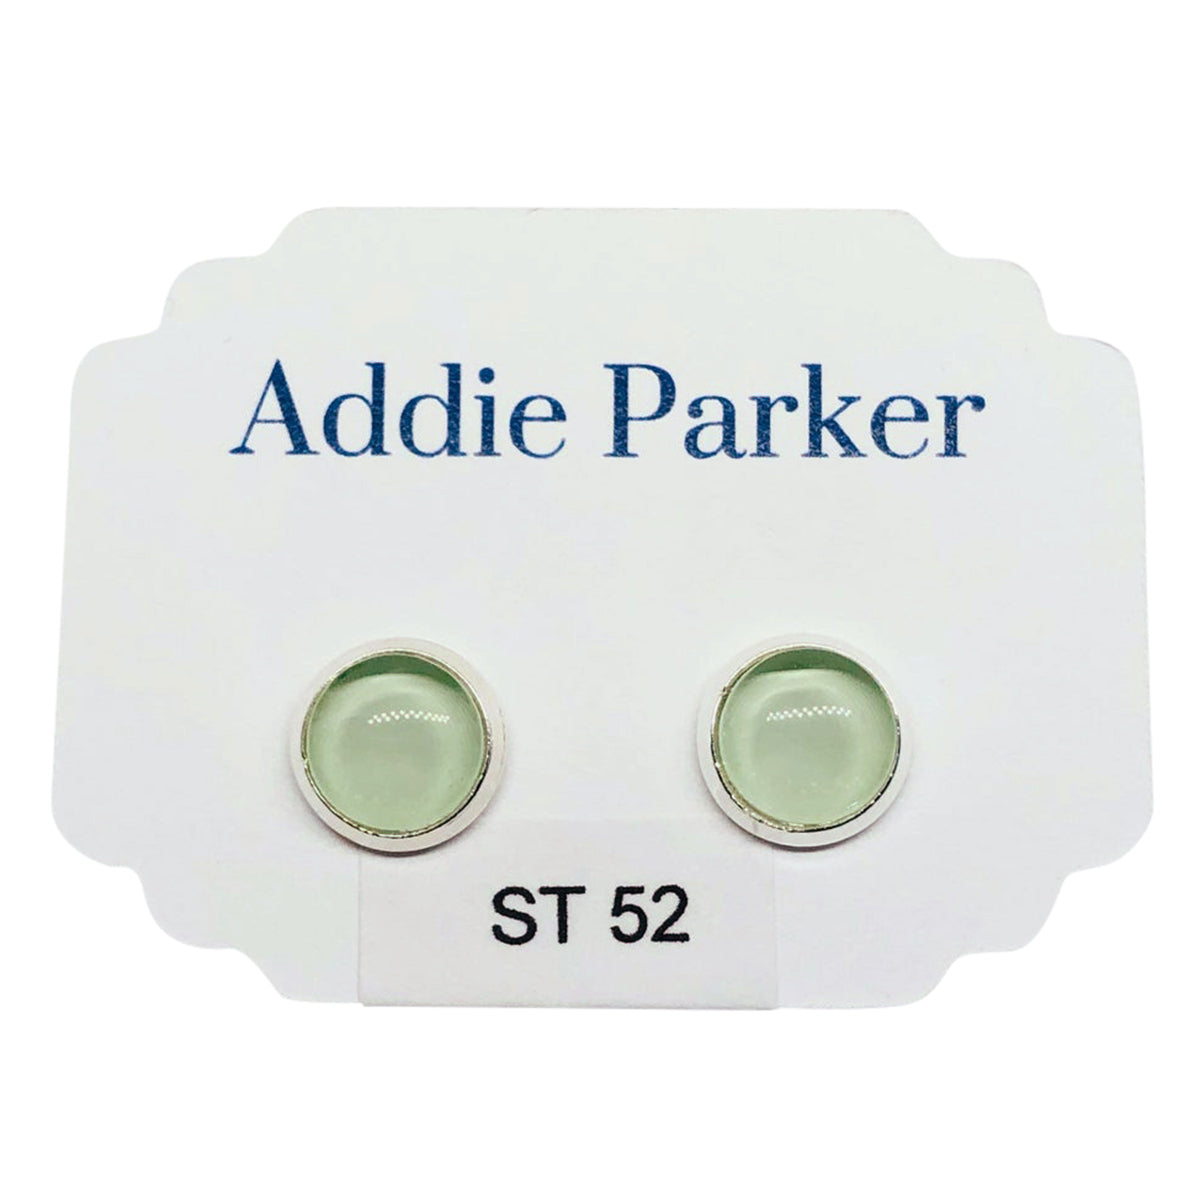 Name badge reading "ADDIE PARKER EARRINGS STUD SET LIGHT GREEN SOLID" with two nickel-free magnetic attachments on the back.